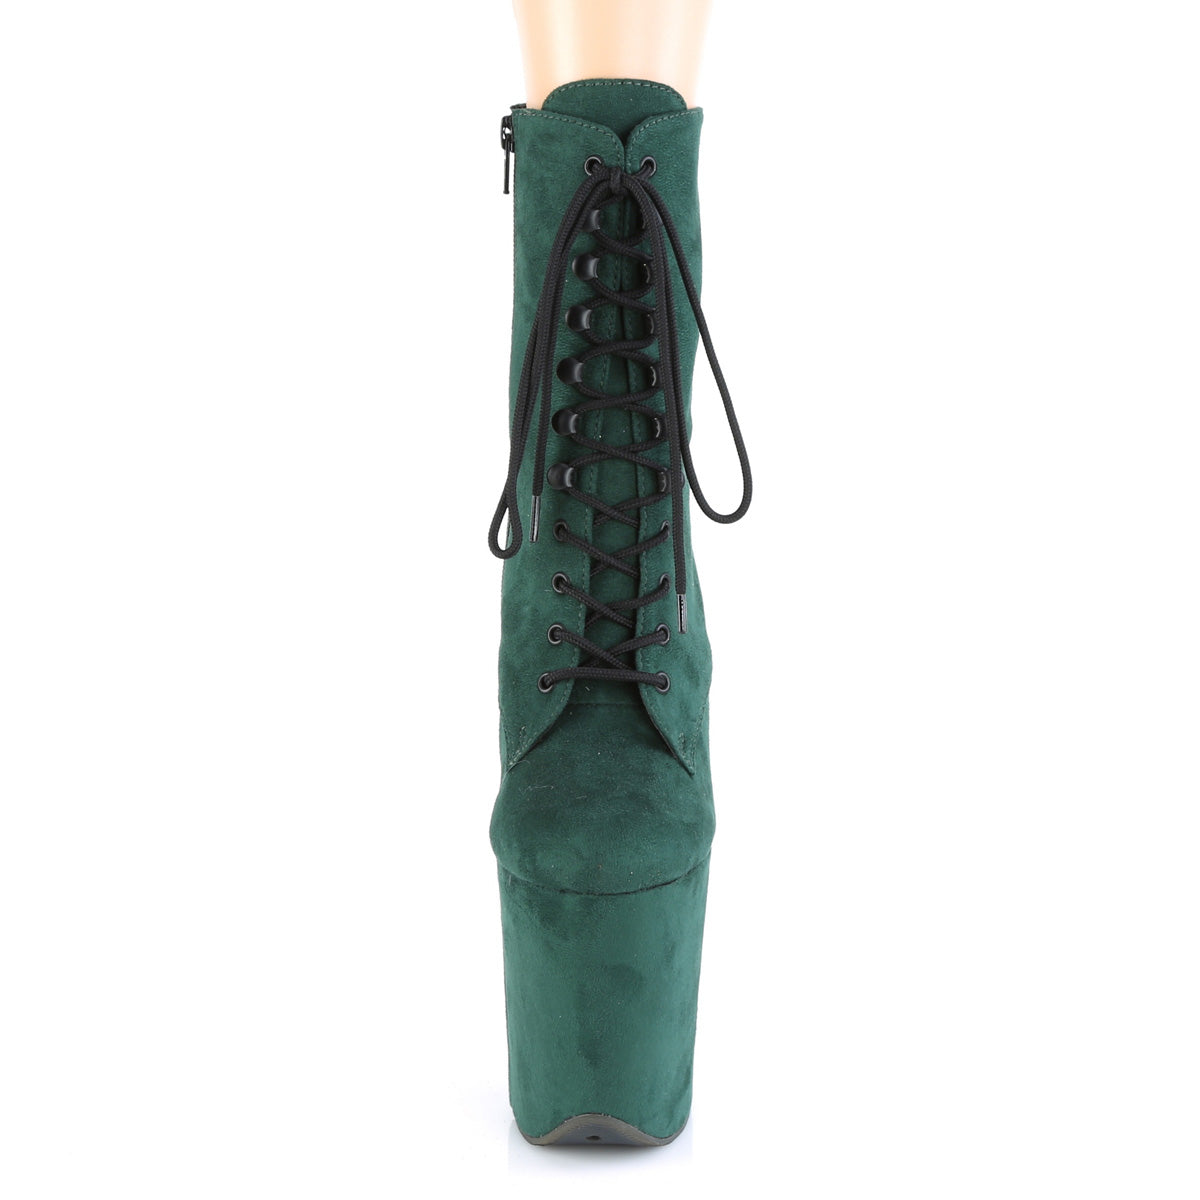 Pleaser Womens Ankle Boots FLAMINGO-1020FS Emerald Green F. Suede/Emerald Green F.Suede